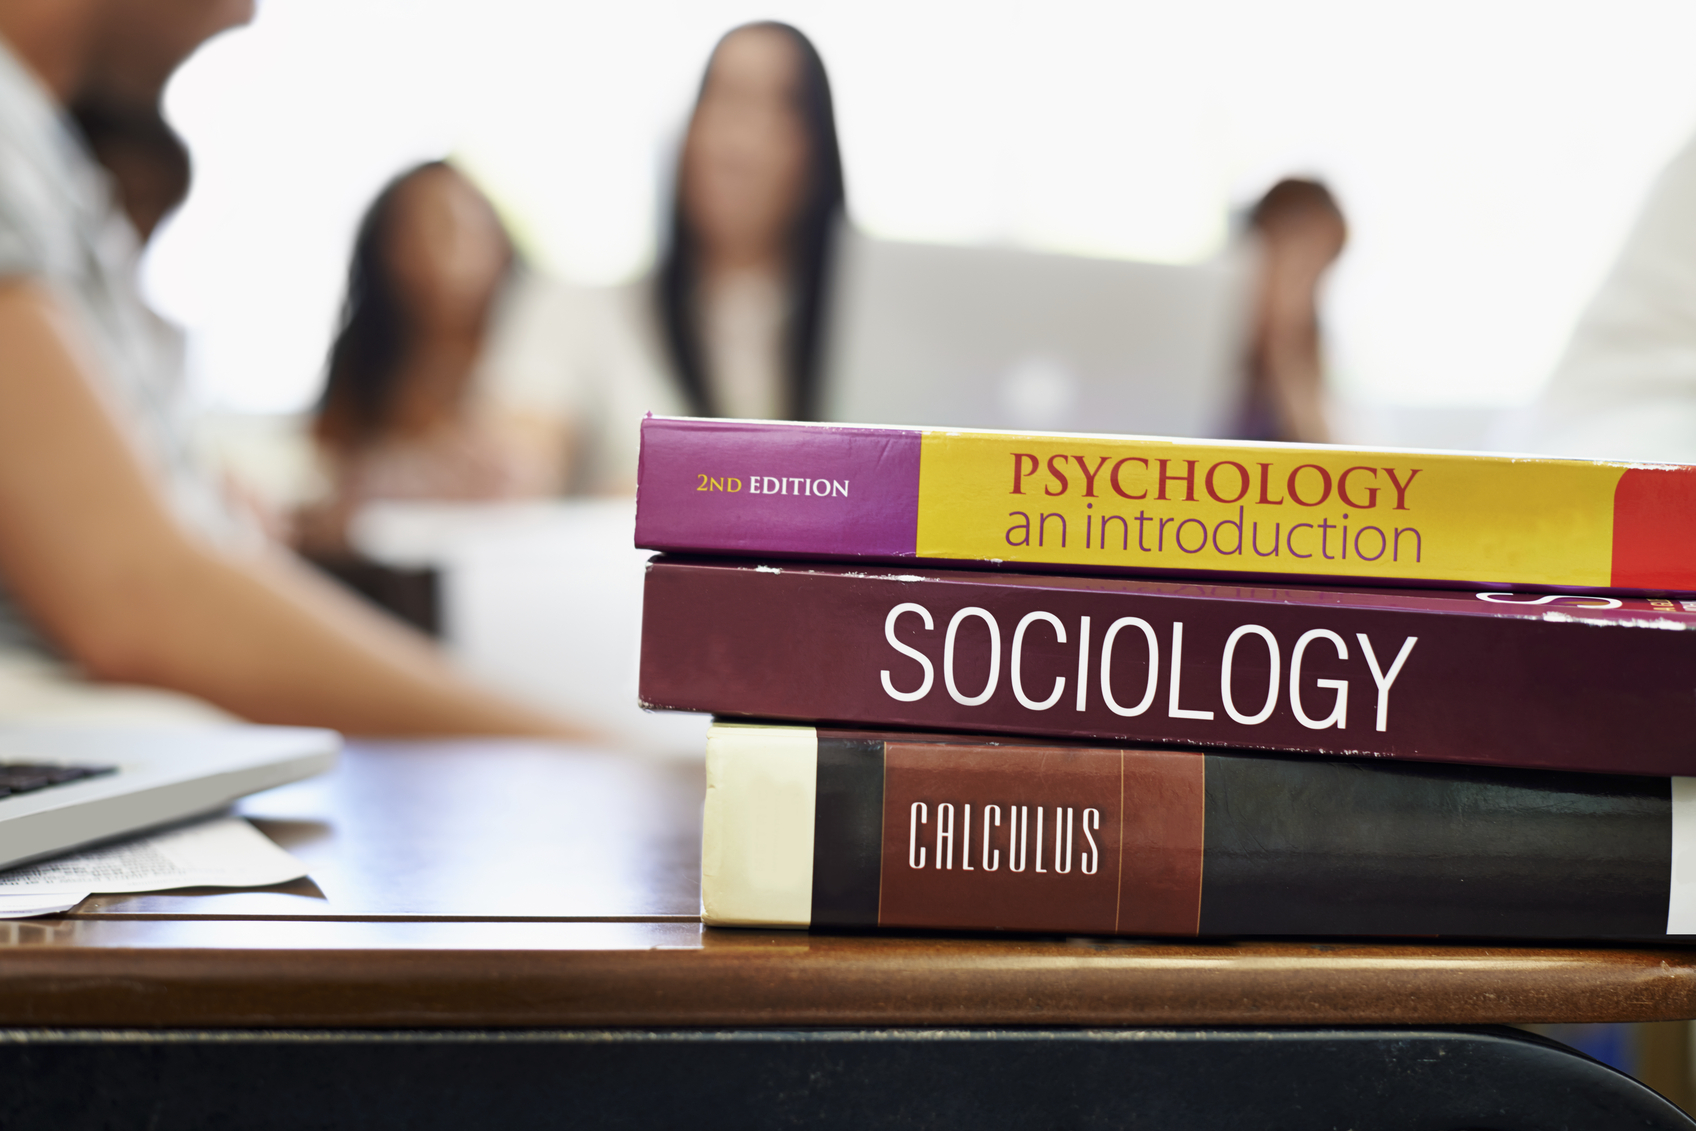 college textbooks - 2ND Edition Psychology an introduction Sociology Calculus